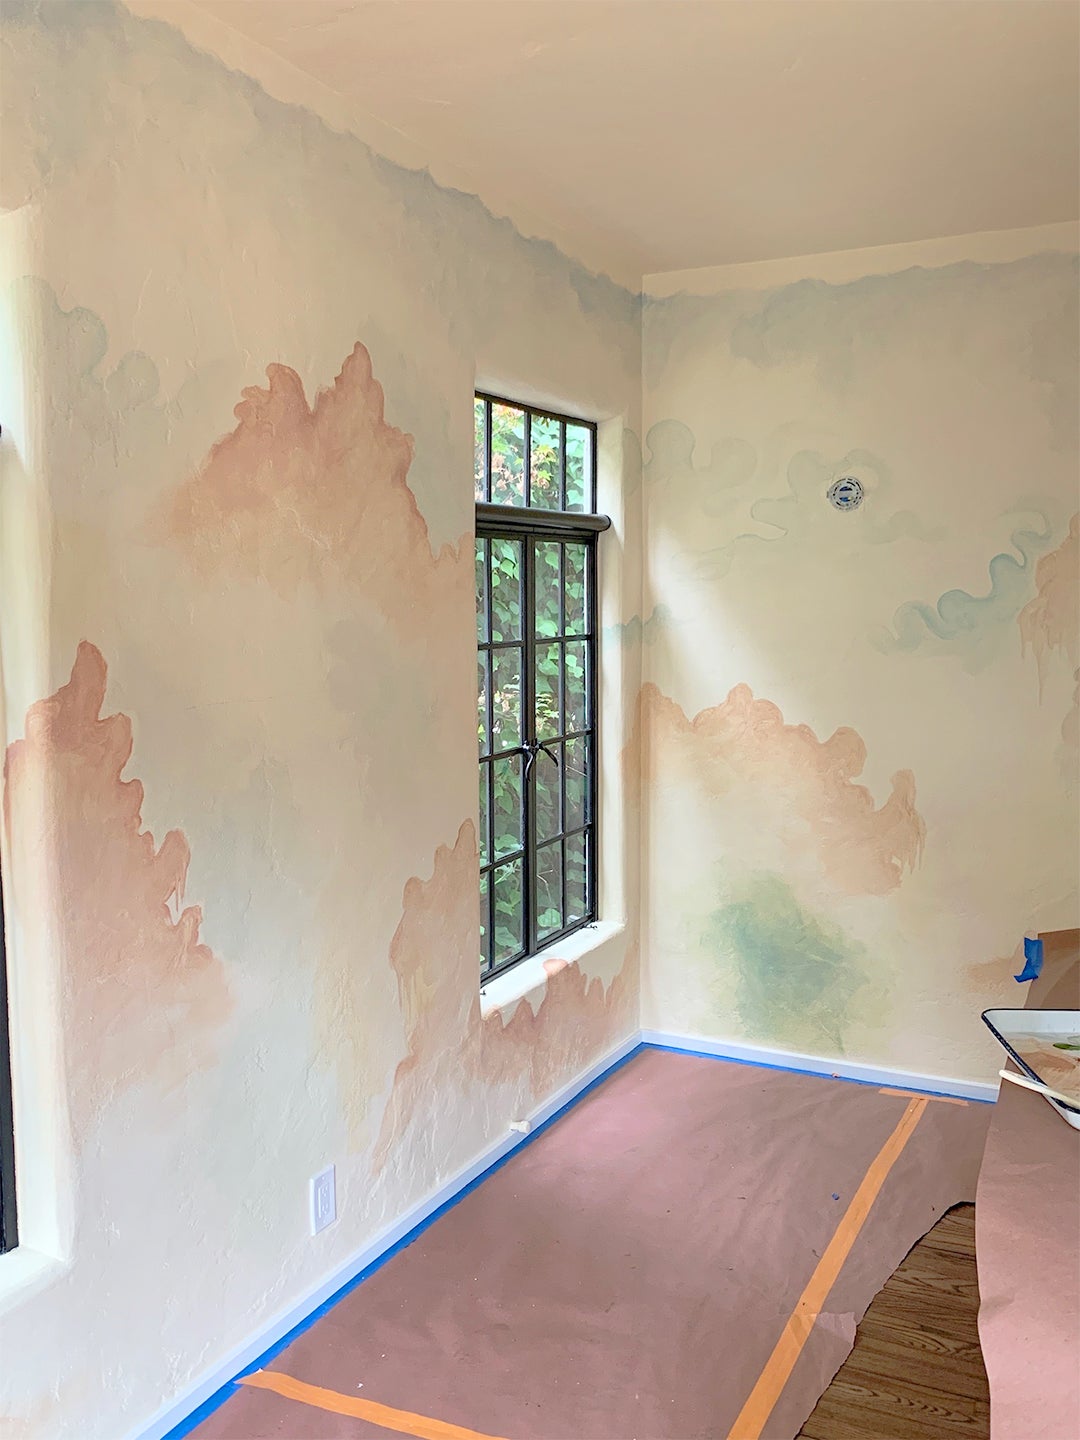 Room with pastel-like clouds on walls